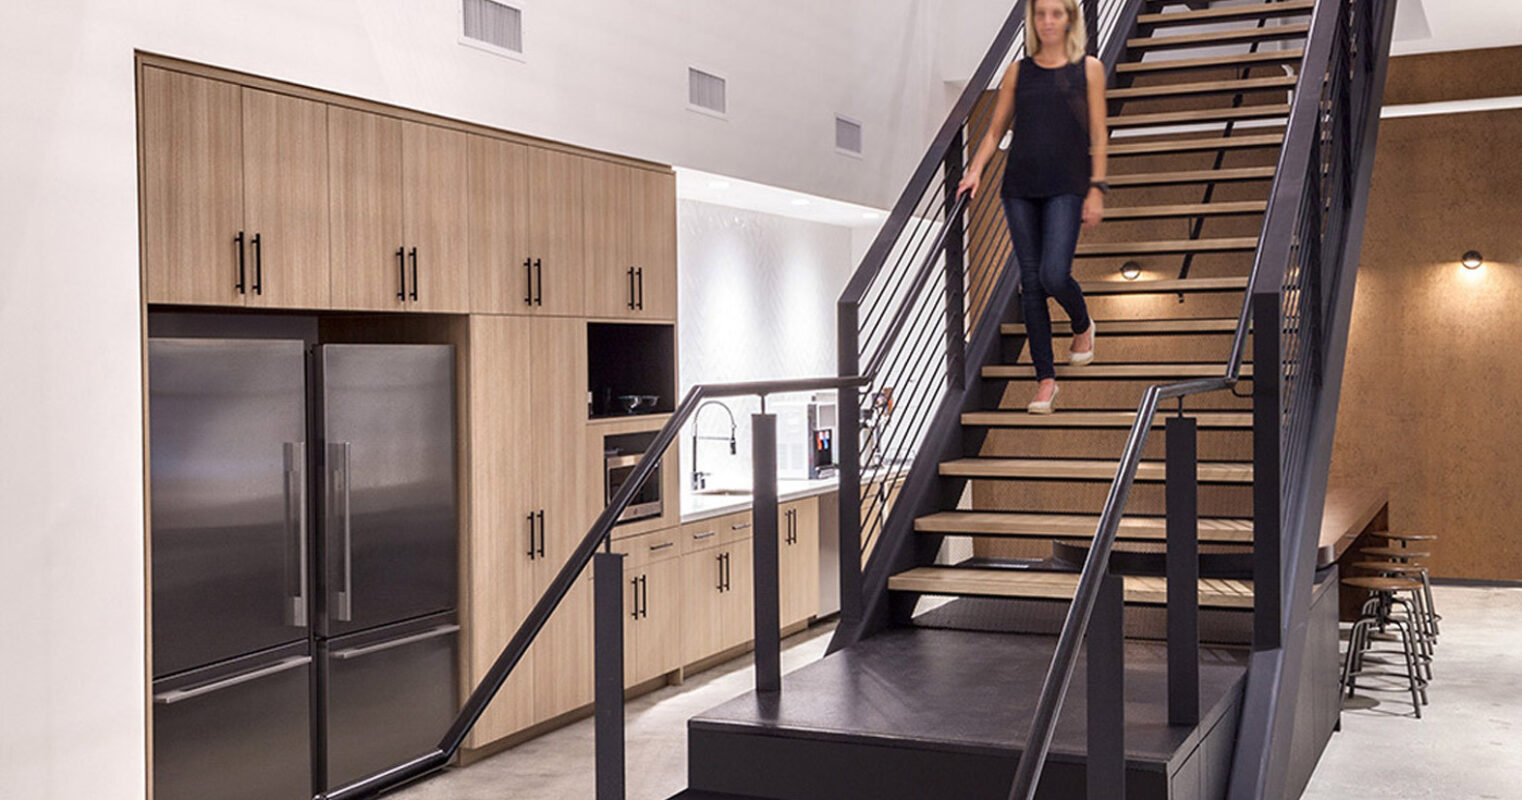 Minimalist staircase with contrasting black steps and white risers anchors the space, flanked by sleek wooden storage cabinets. Overhead, playful pendant lights dangle, enhancing the industrial loft feel of the high-ceiling interior.